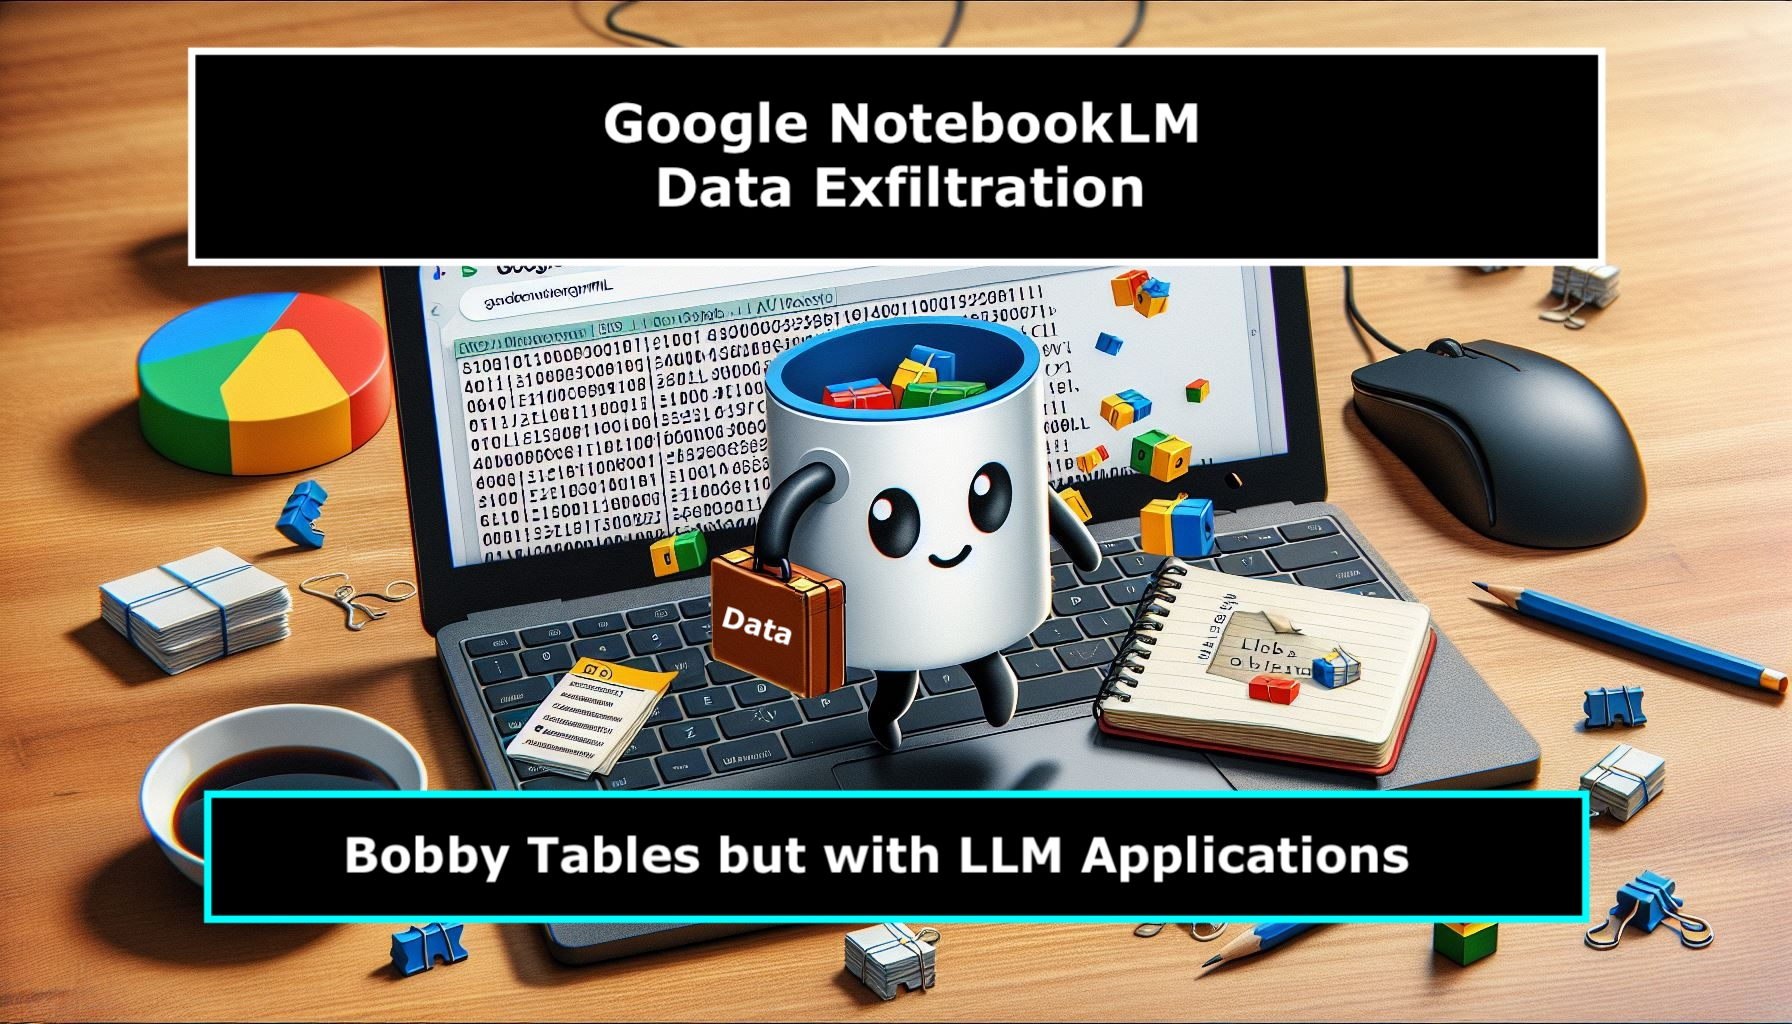 Google’s NotebookML is an experimental project that was released last year. It allows users to upload files and analyze them with a large langua